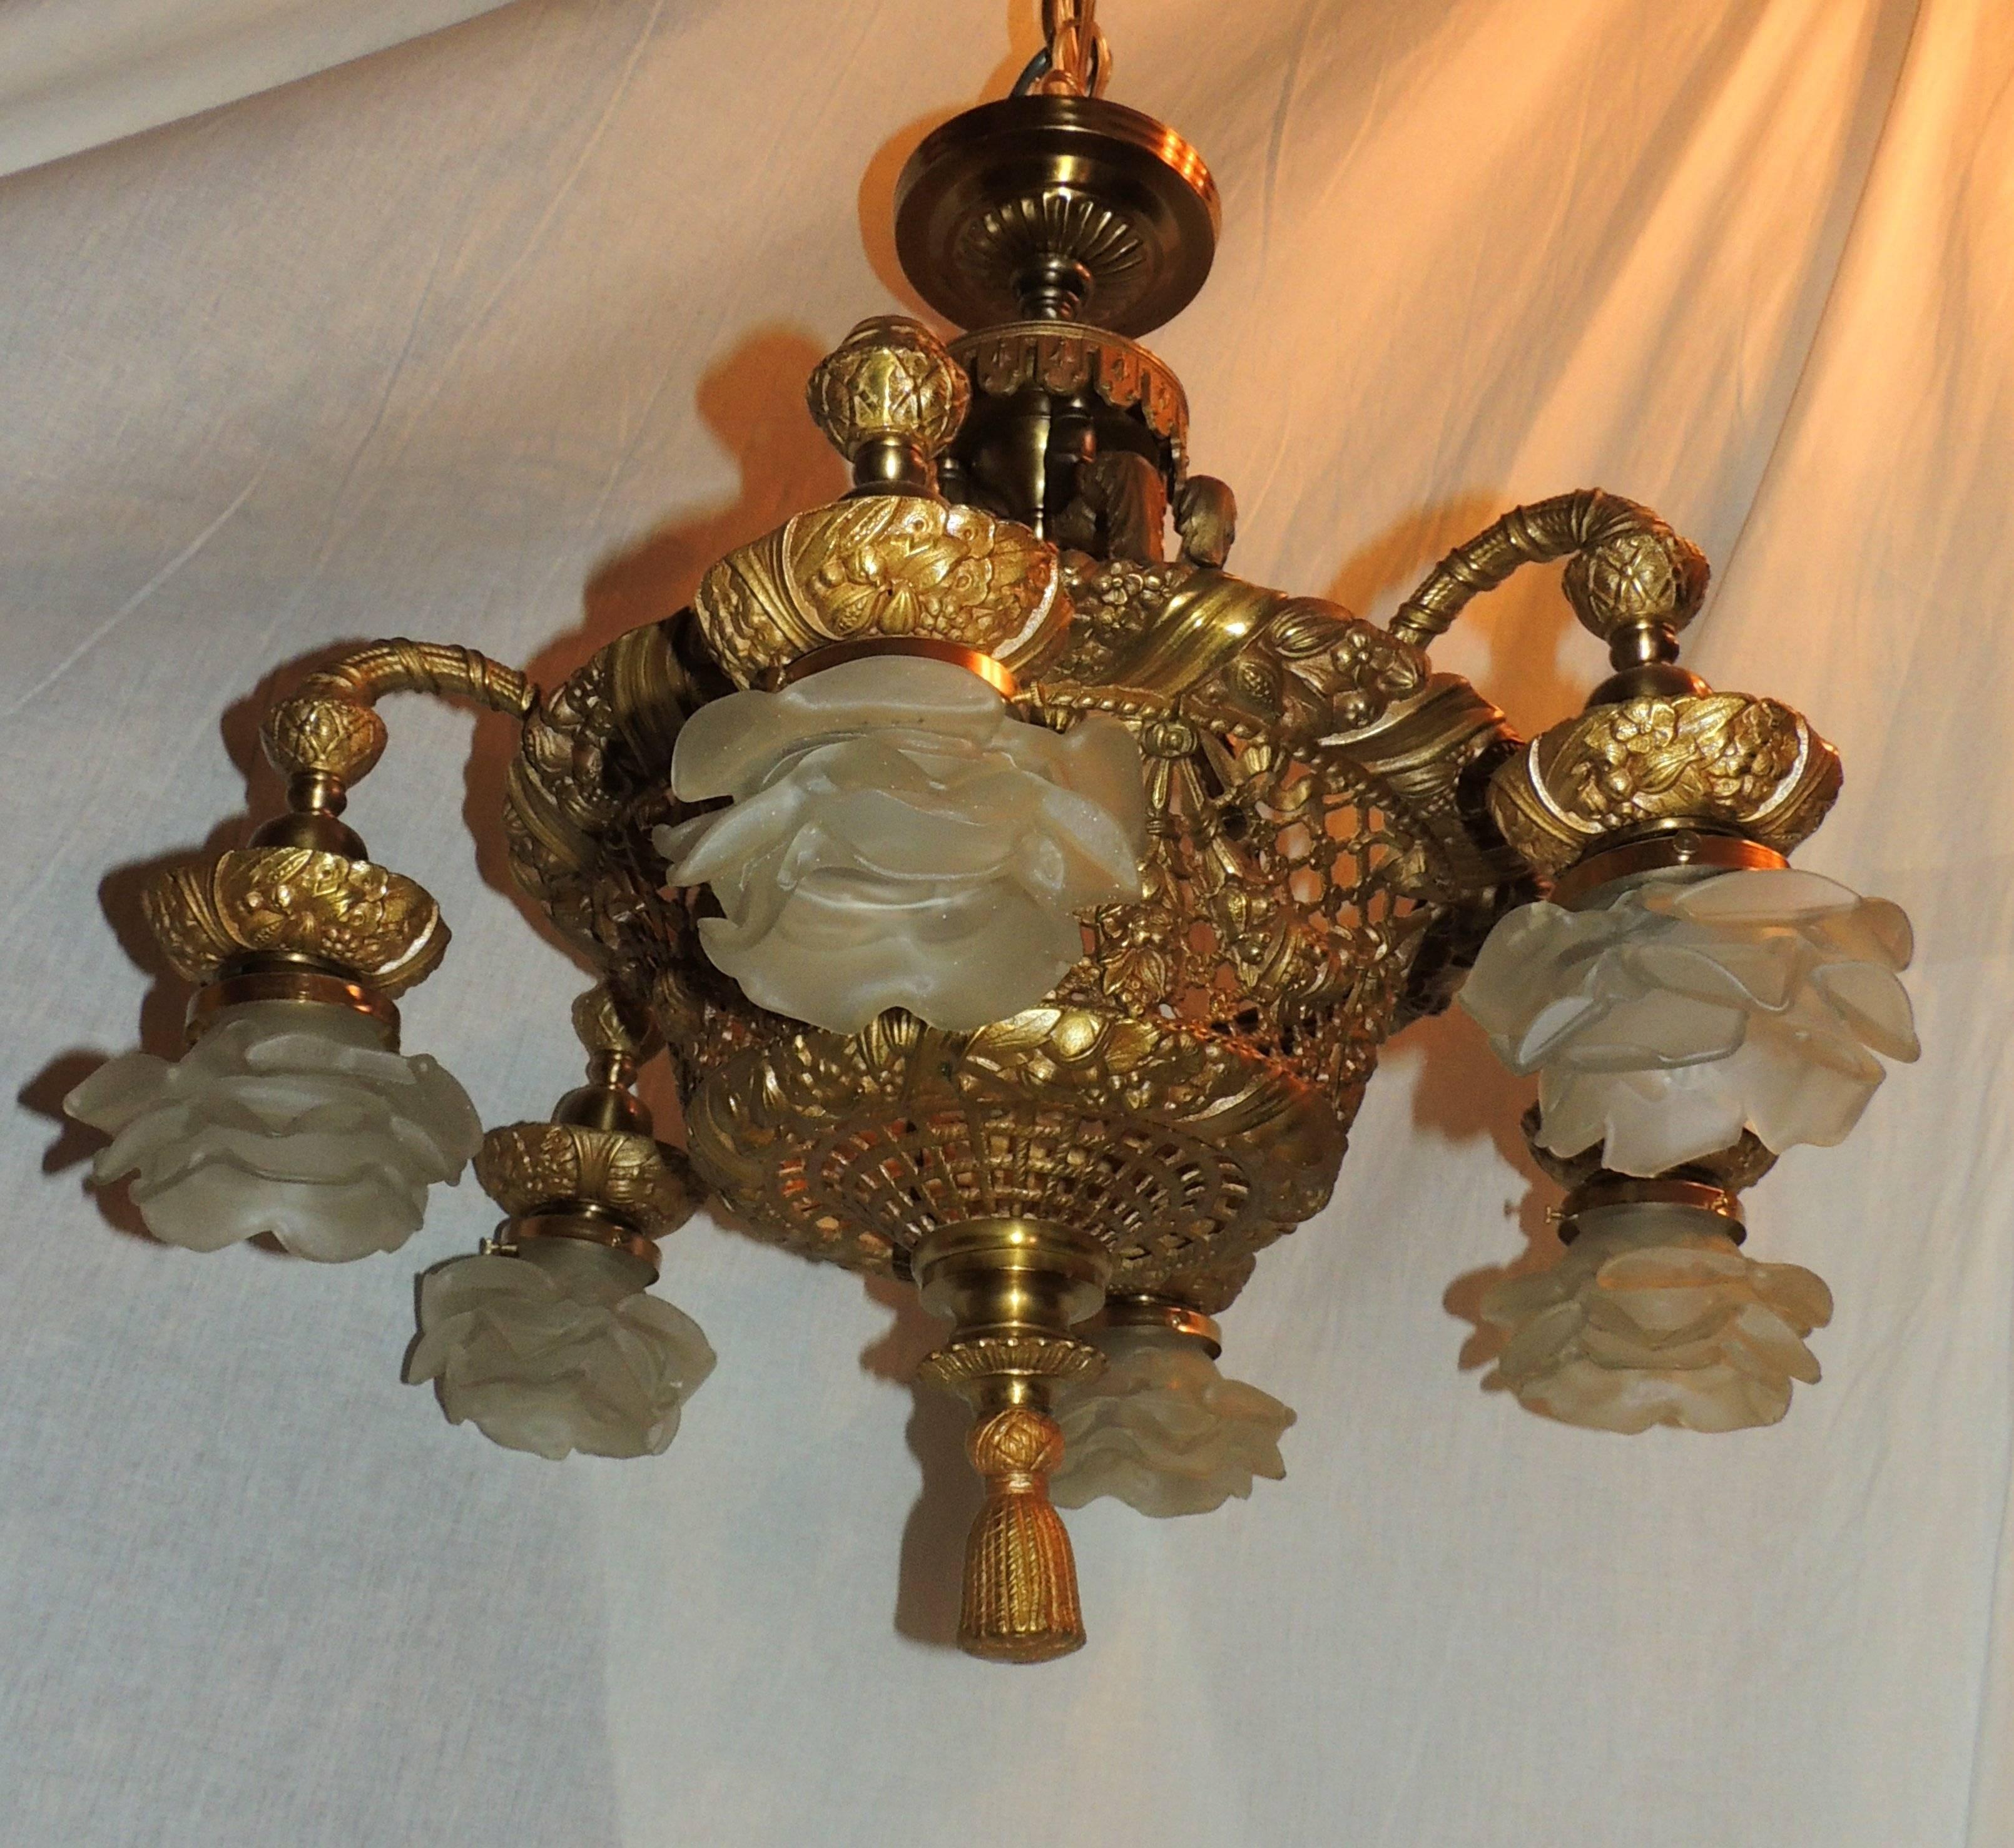 Wonderful French doré bronze basket form pierced and swag chandelier fixture with six frosted glass rosebud shades.
 
 
 
 
 
   
 
 
 
 
 
 
 
 
 
 
 
 
 


 
 
 
 
 
   
 
 
 
 
 
 
 
 
 
 
 
 


         